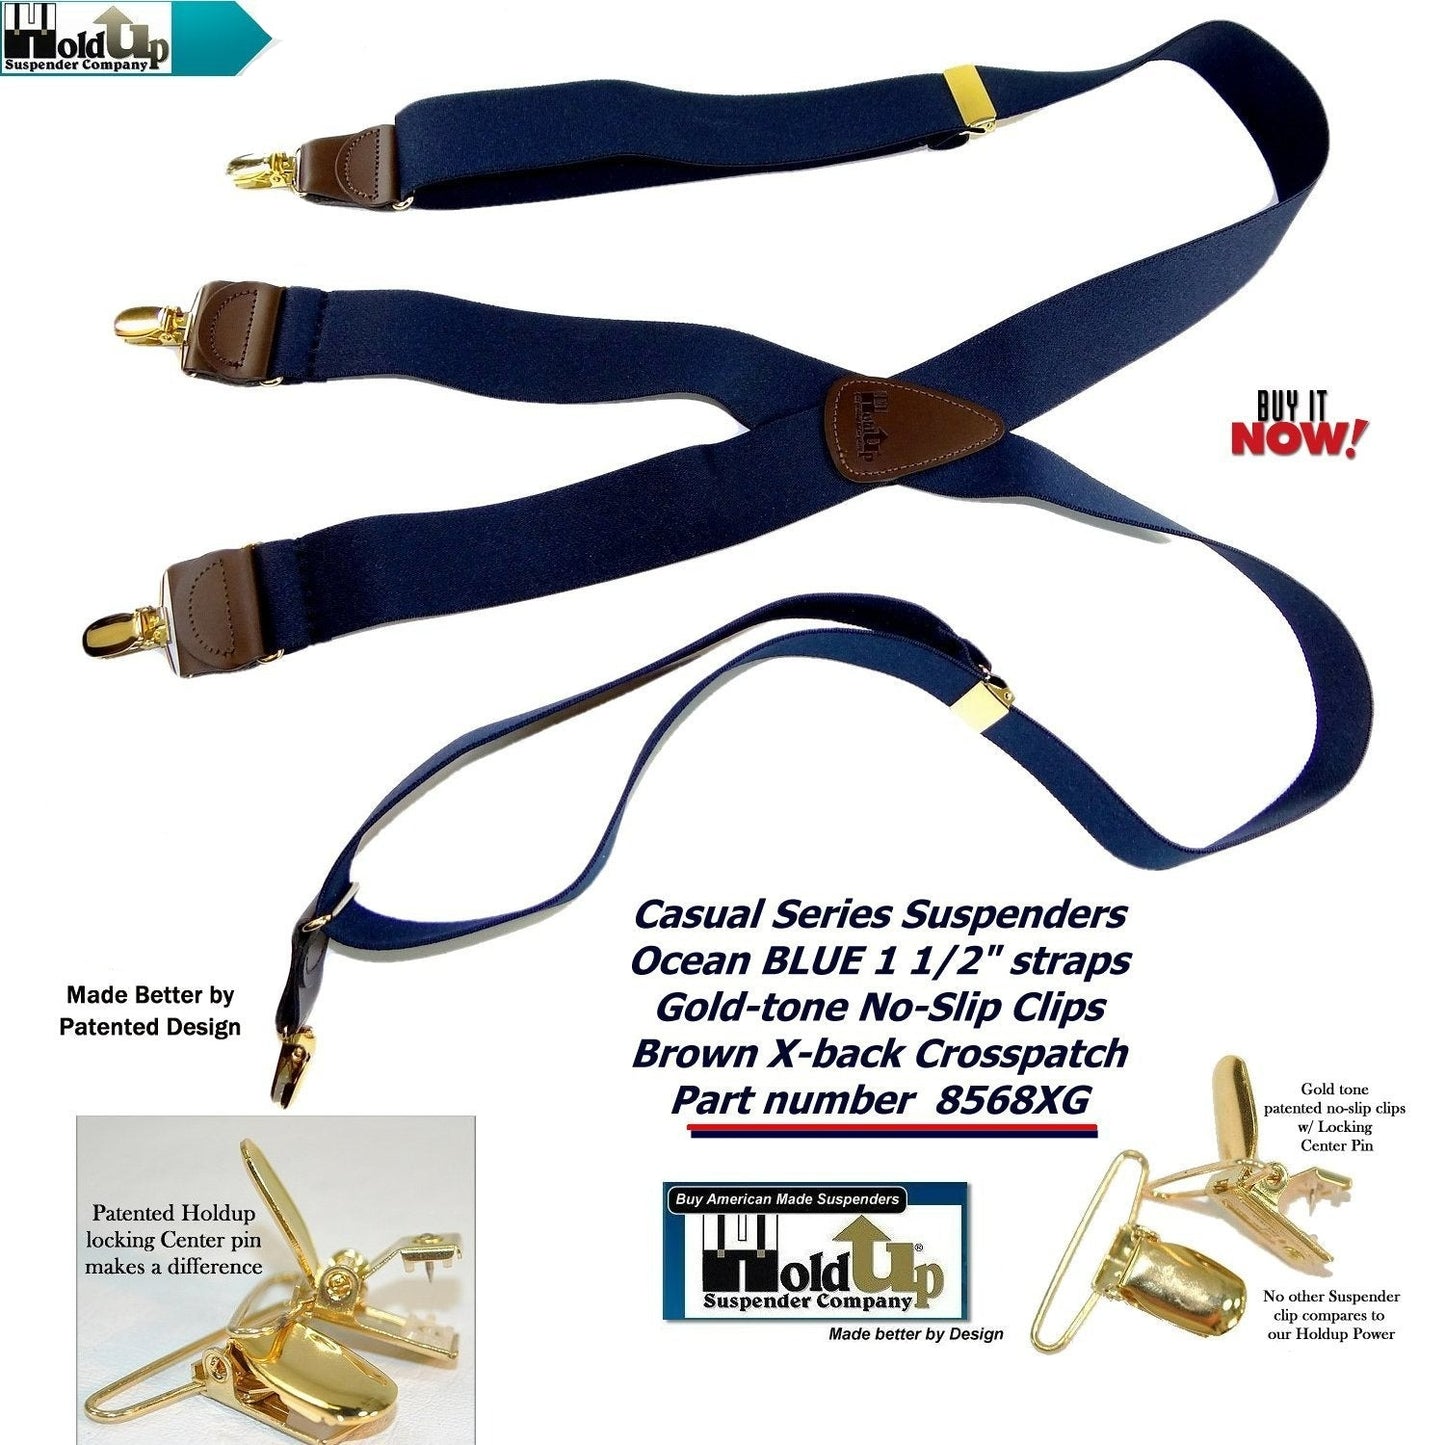 USA Made Holdup Suspenders Dark Ocean Blue 1 1/2" wide X-back Suspenders with Patented No-slip Gold-tone  Clips